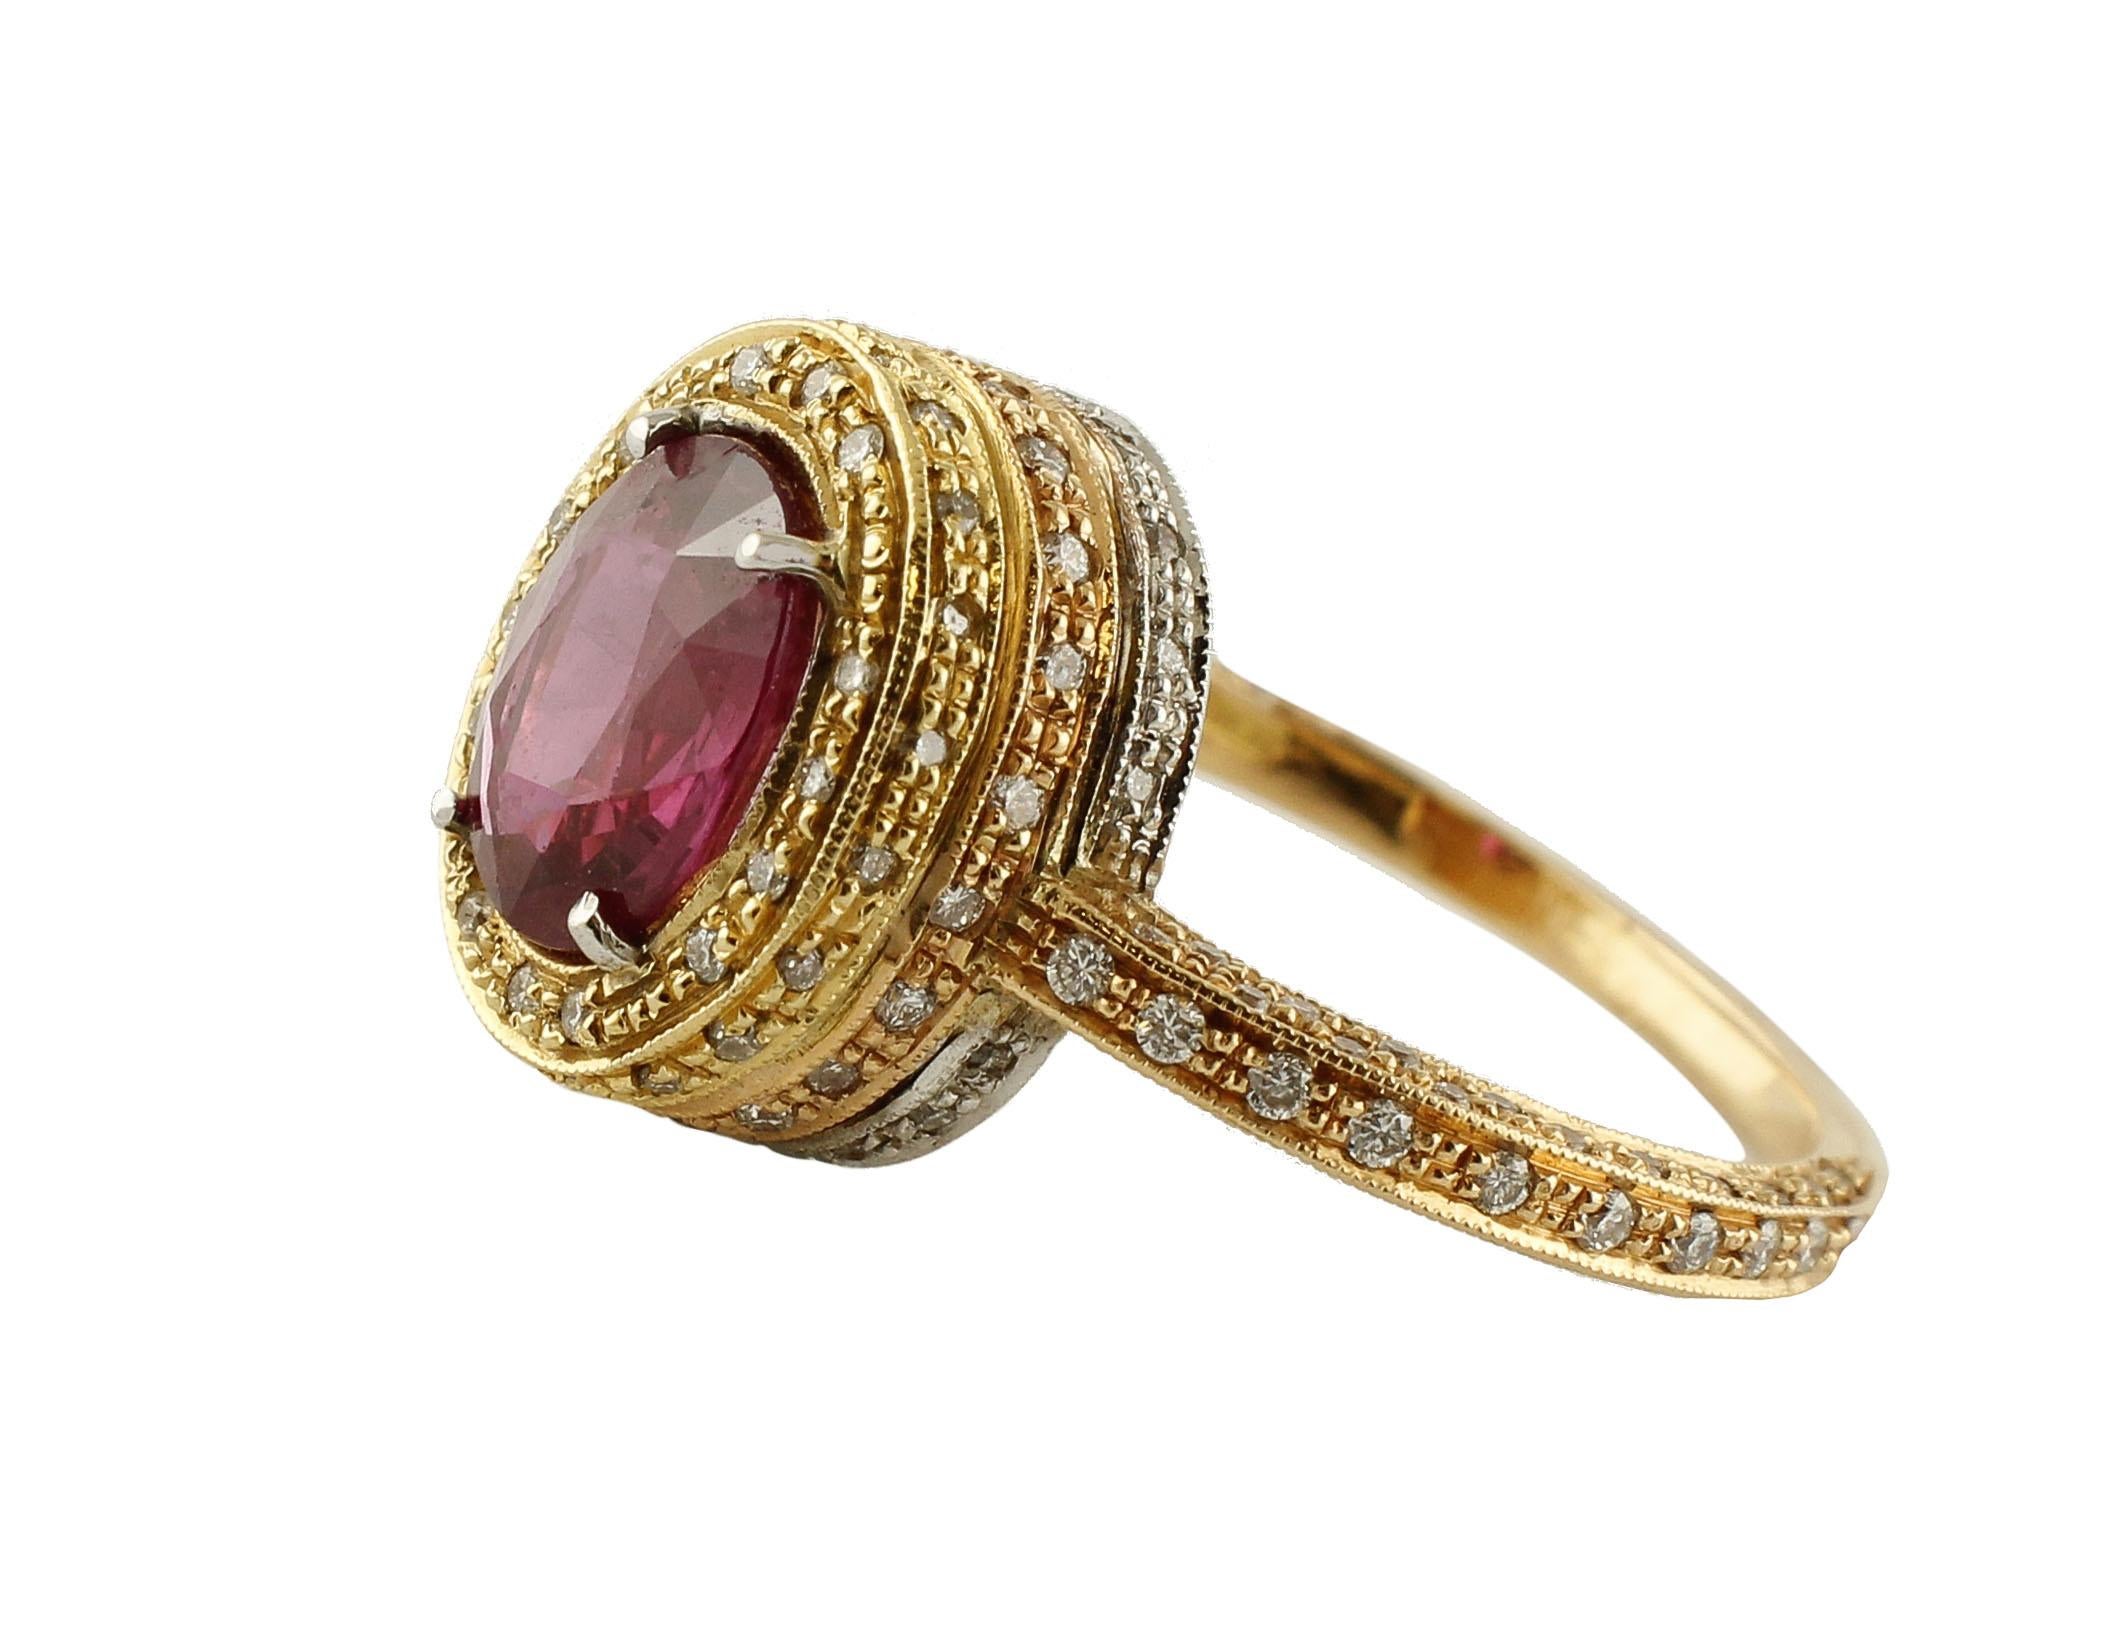 Retro 2.40 Carat Ruby, Diamonds, White Yellow and Rose Gold Solitaire Ring